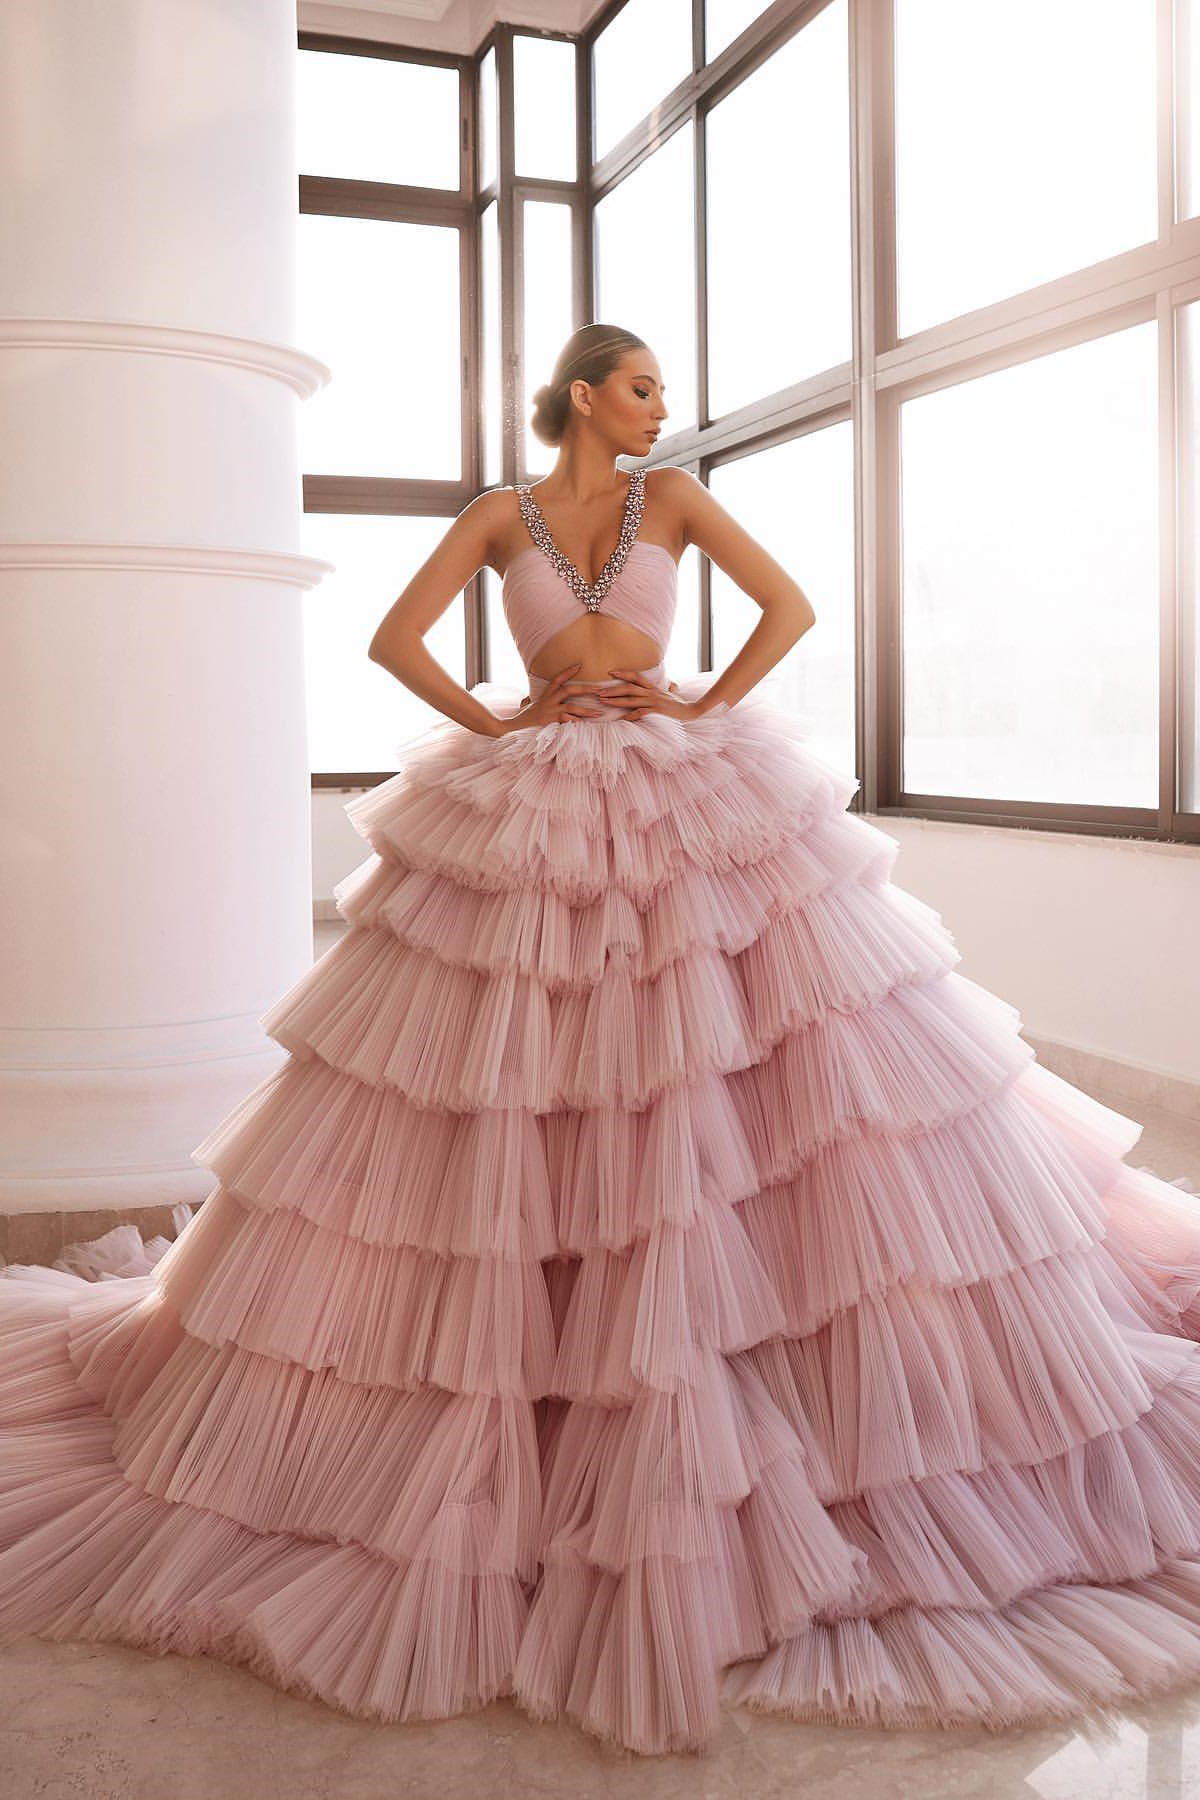 Gorgeous Pink V-Neck Sleeveless Evening Dress Tulle Layered With Crystals - lulusllly